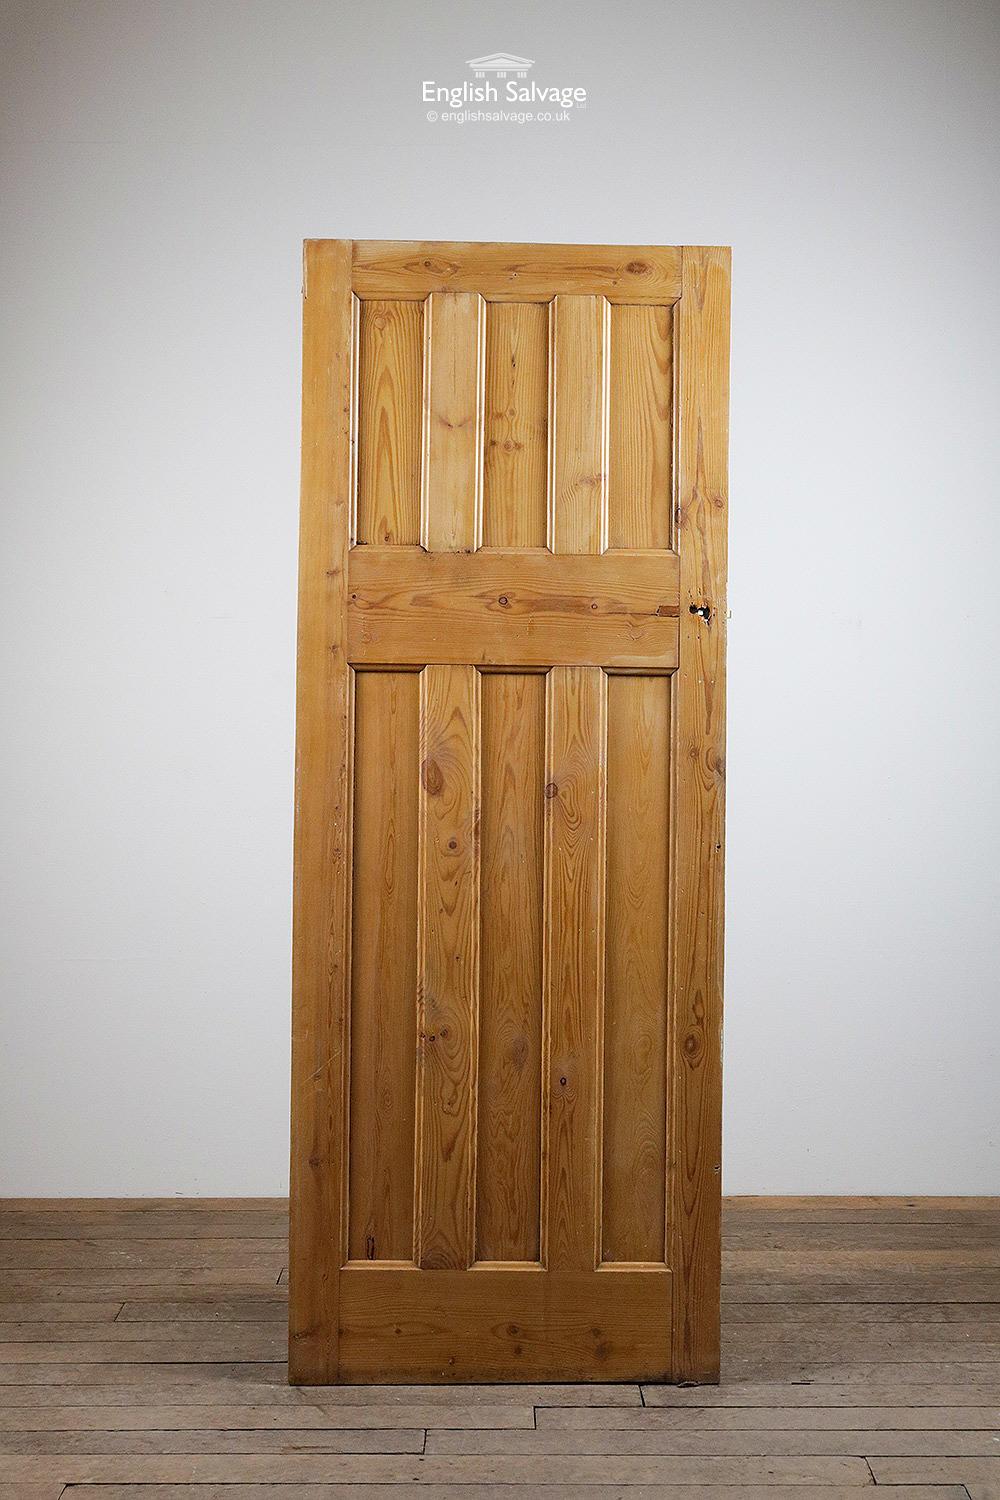 Reclaimed six-panel (three over three) internal door.

Varnished. Old lock and fitting holes present.